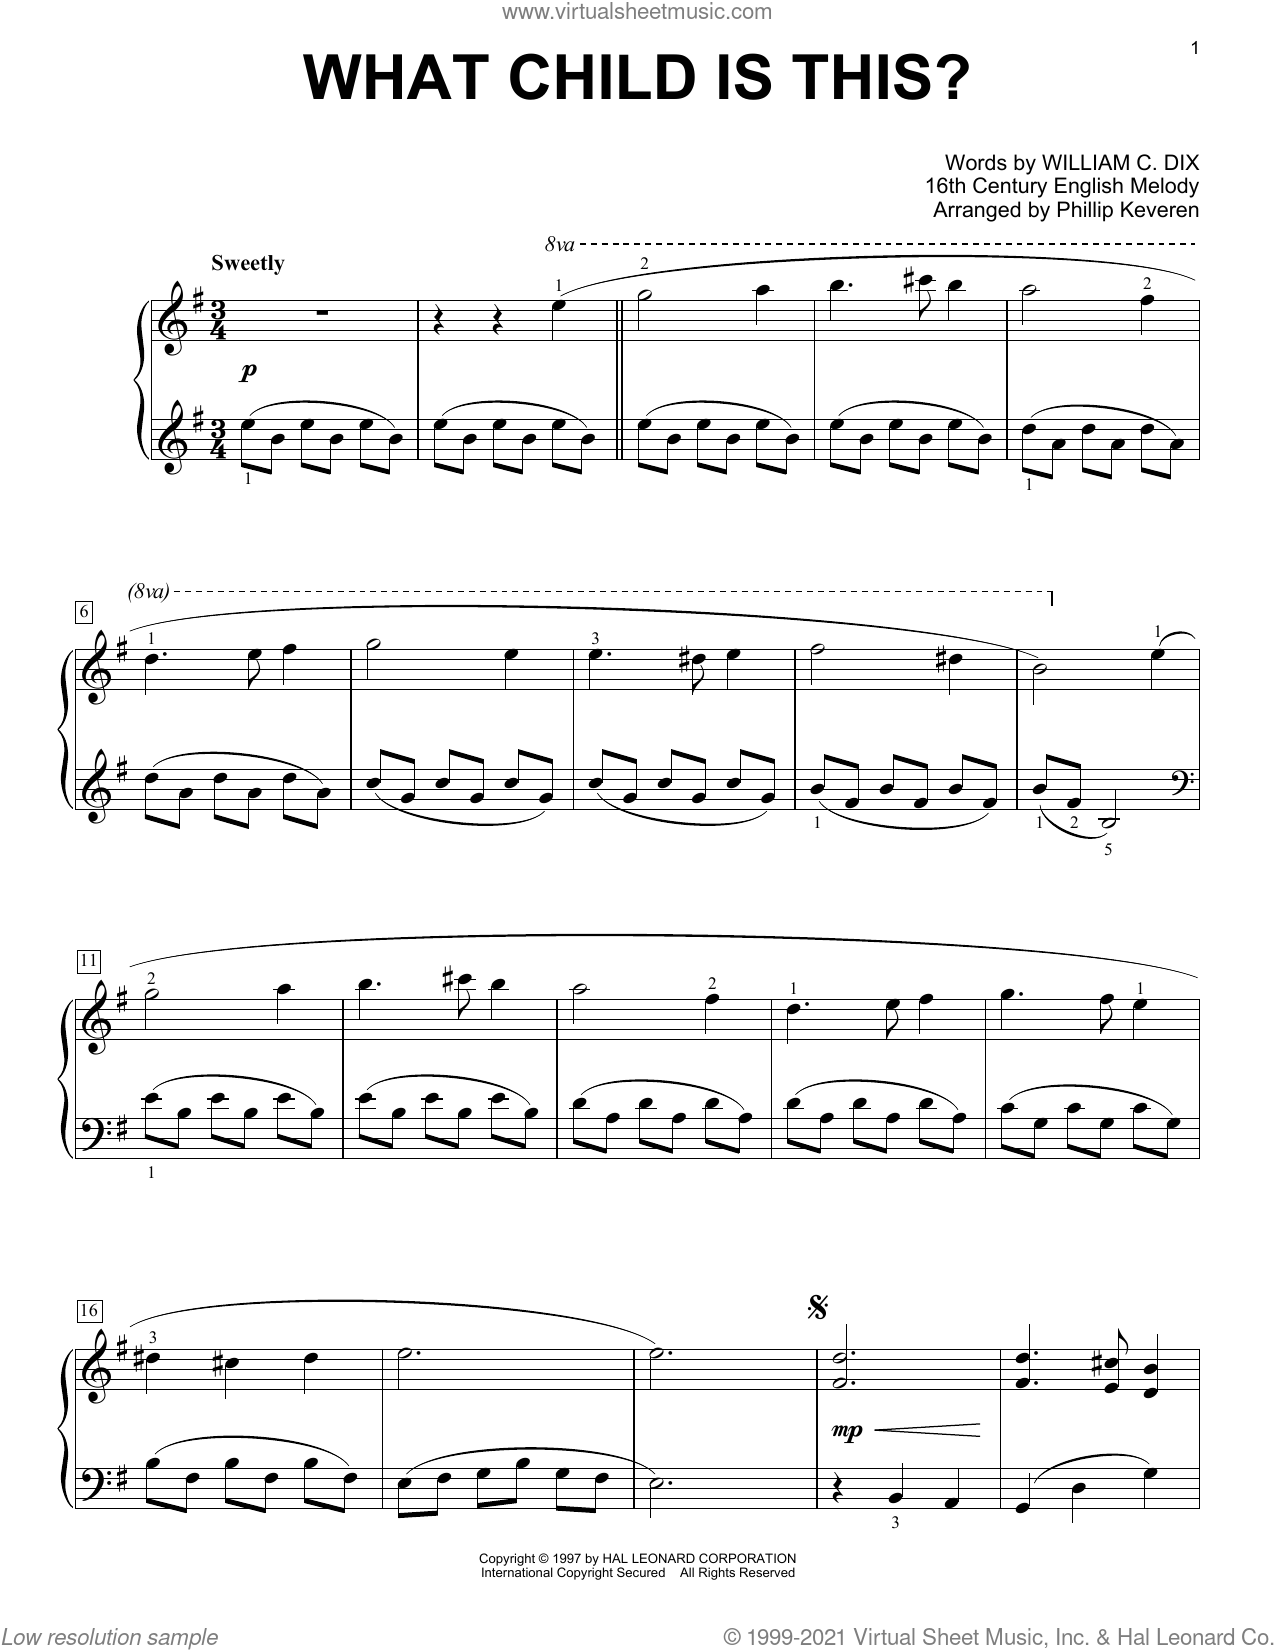 What Child Is This? (arr. Phillip Keveren) sheet music (E-Z Play)